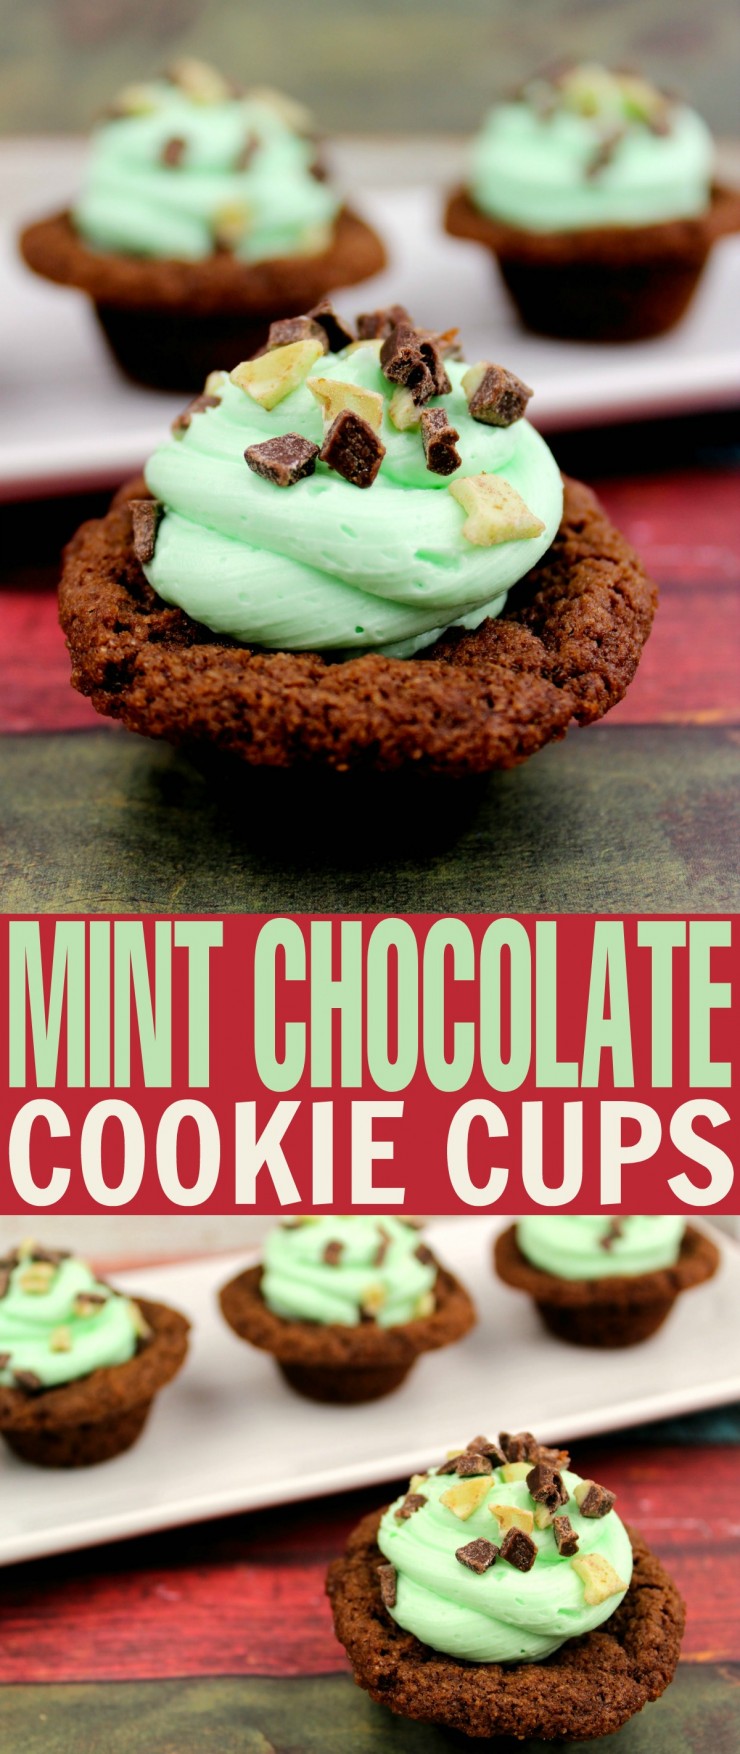 These mint chocolate cookie cups are a delicious twist on the classic brownie that your whole family will enjoy. Serve at parties or simply enjoy with coffee.